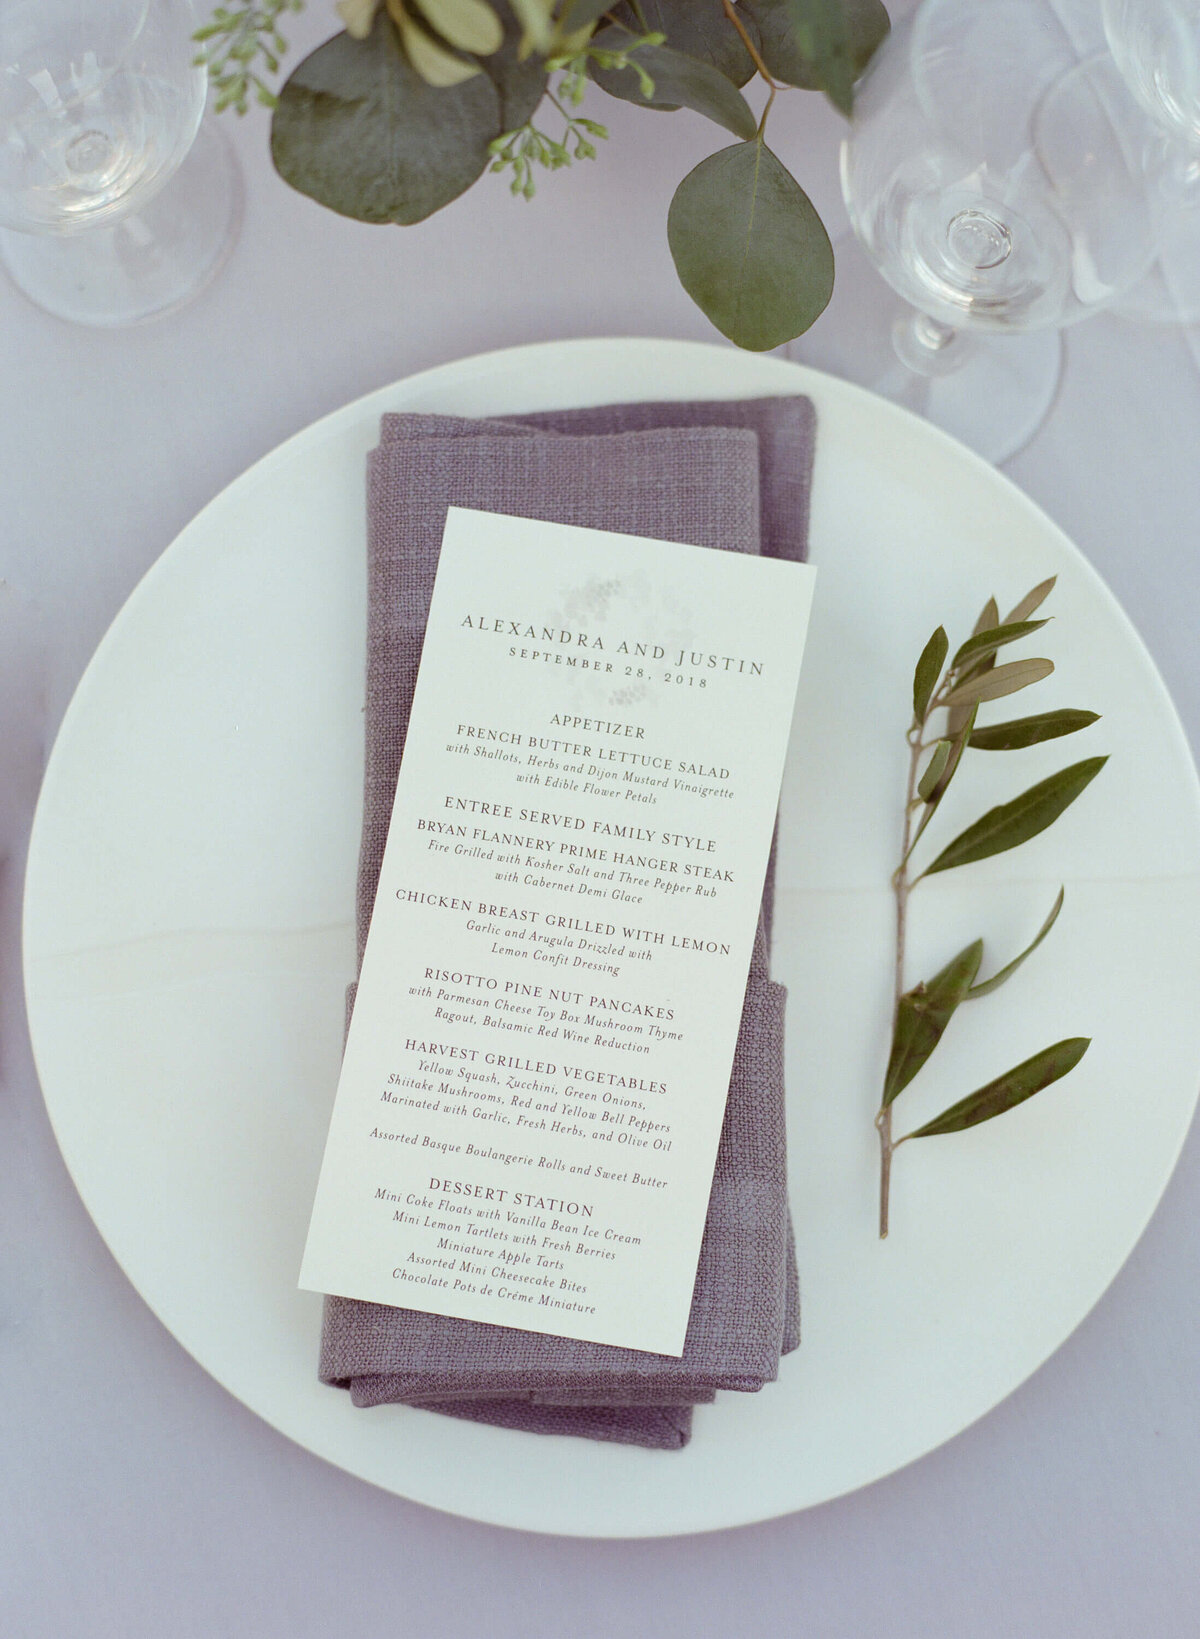 Three course wedding reception menu placed on a plate with a lavender napkin.